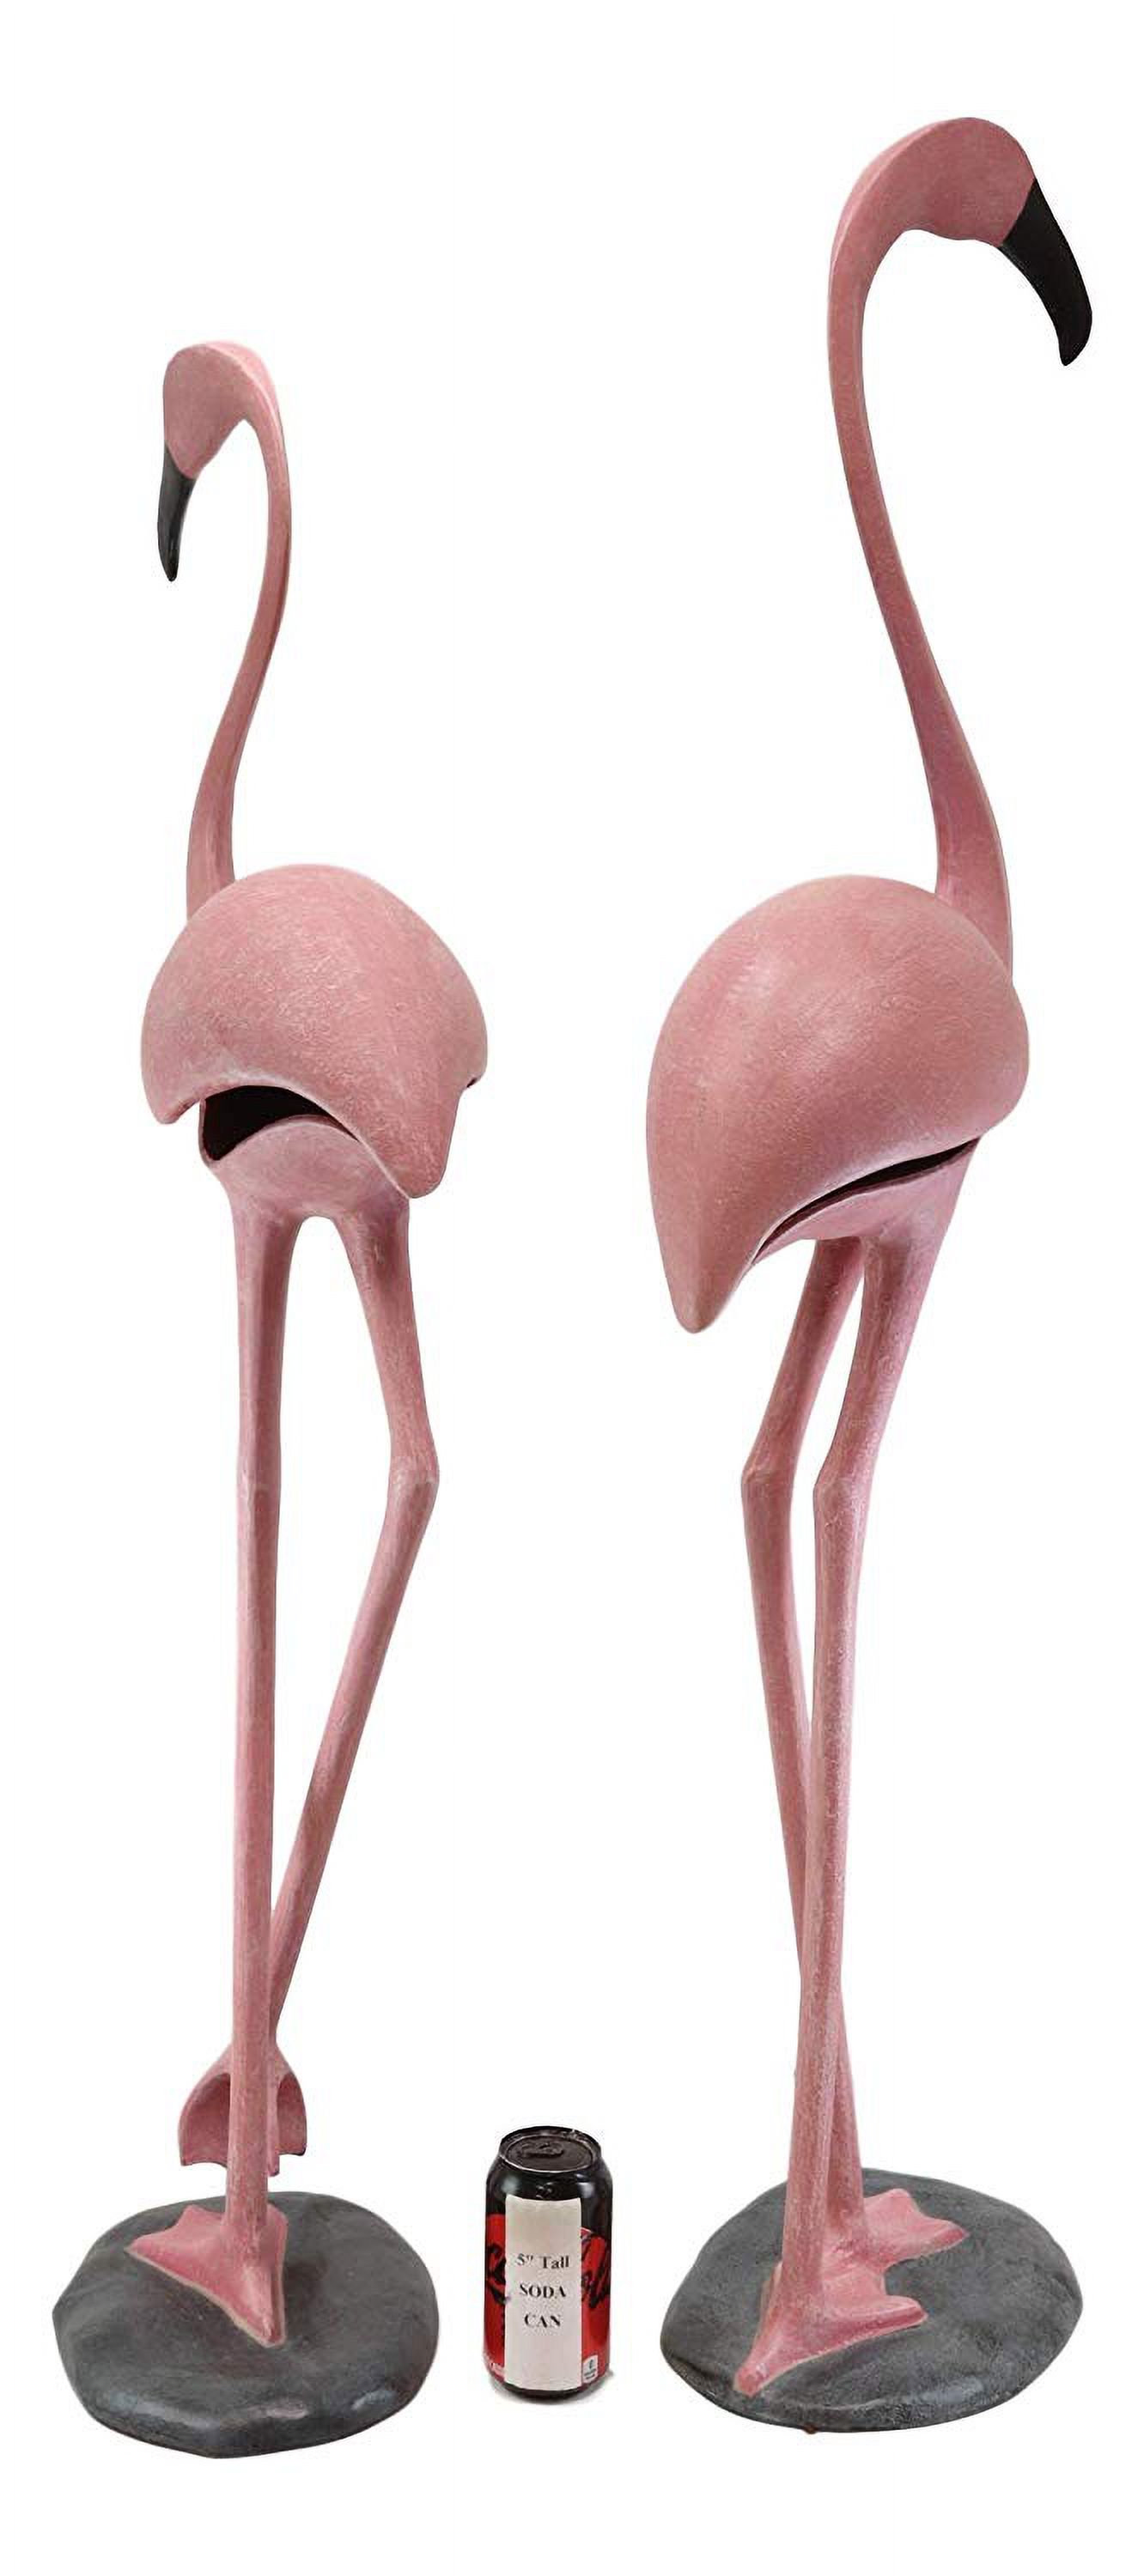 Ebros Large Set of 2 Colorful Tropical Rainforest Pink Flamingo Garden Statues - image 4 of 6